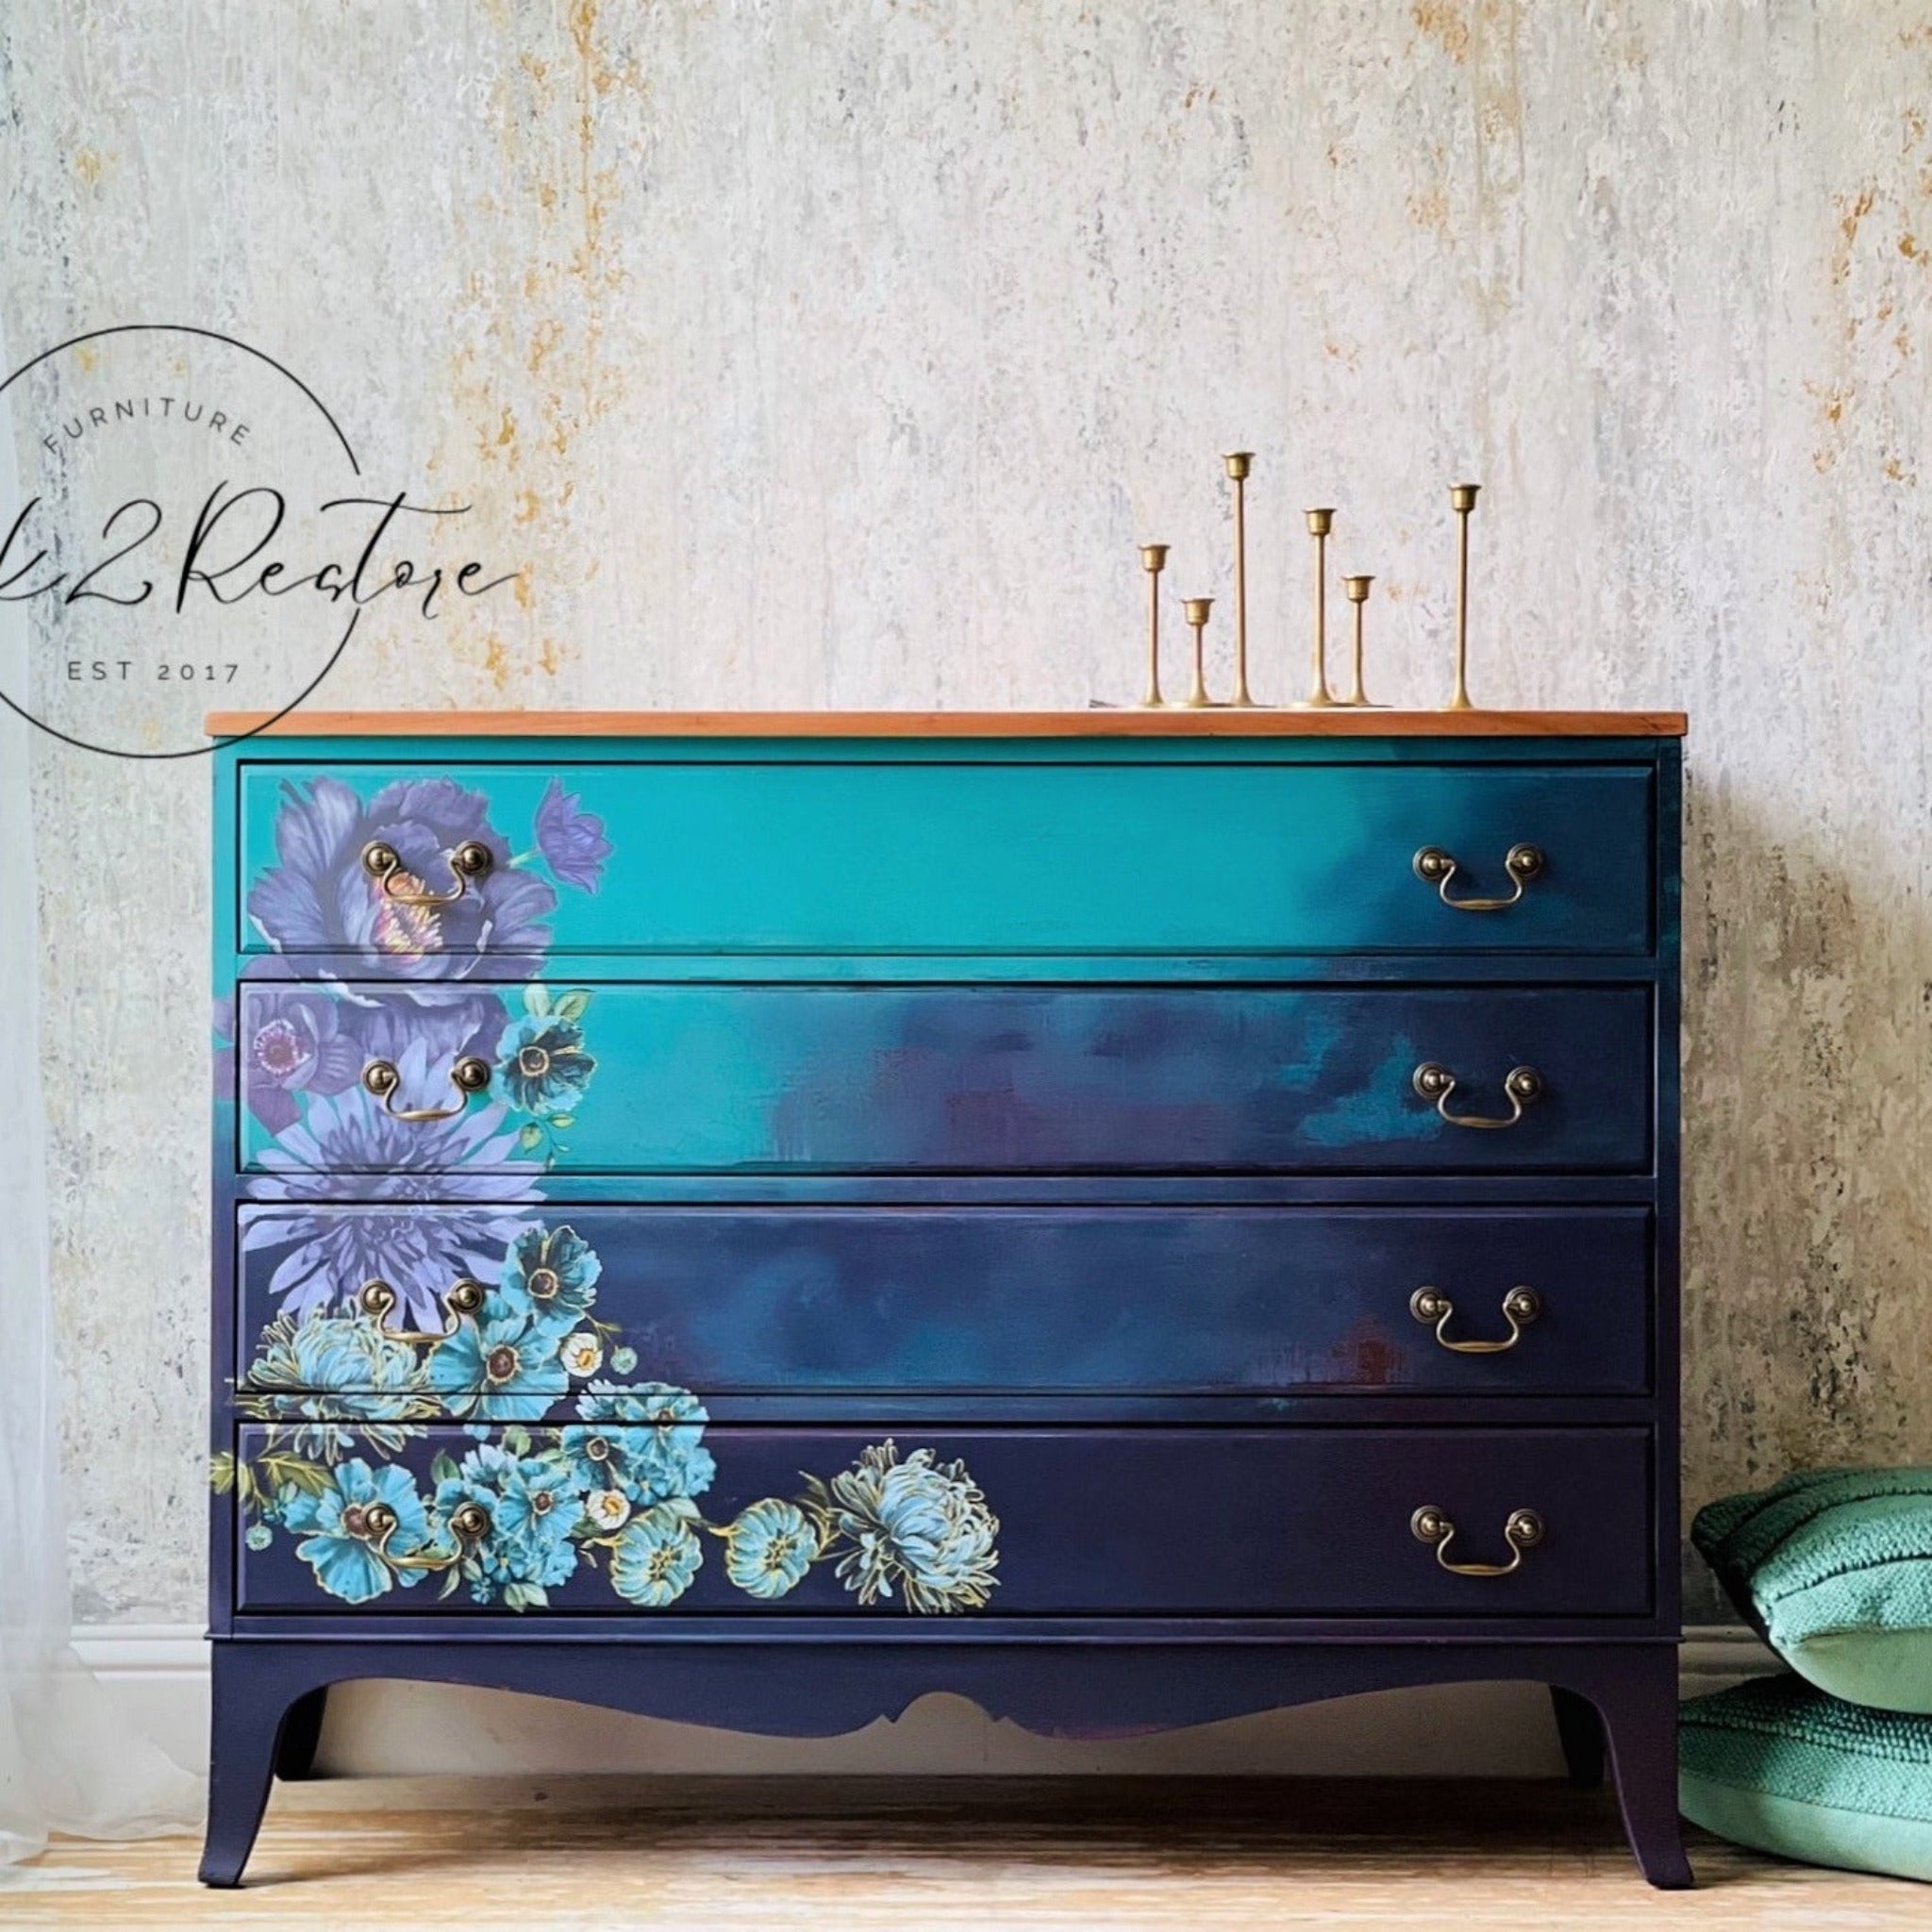 A 4-drawer dresser refurbished by Click 2 Restore is painted an ombre blend of bright teal down to navy blue and features ReDesign with Prima's Gilded Floral small transfer towards the bottom left corner of the dresser front.